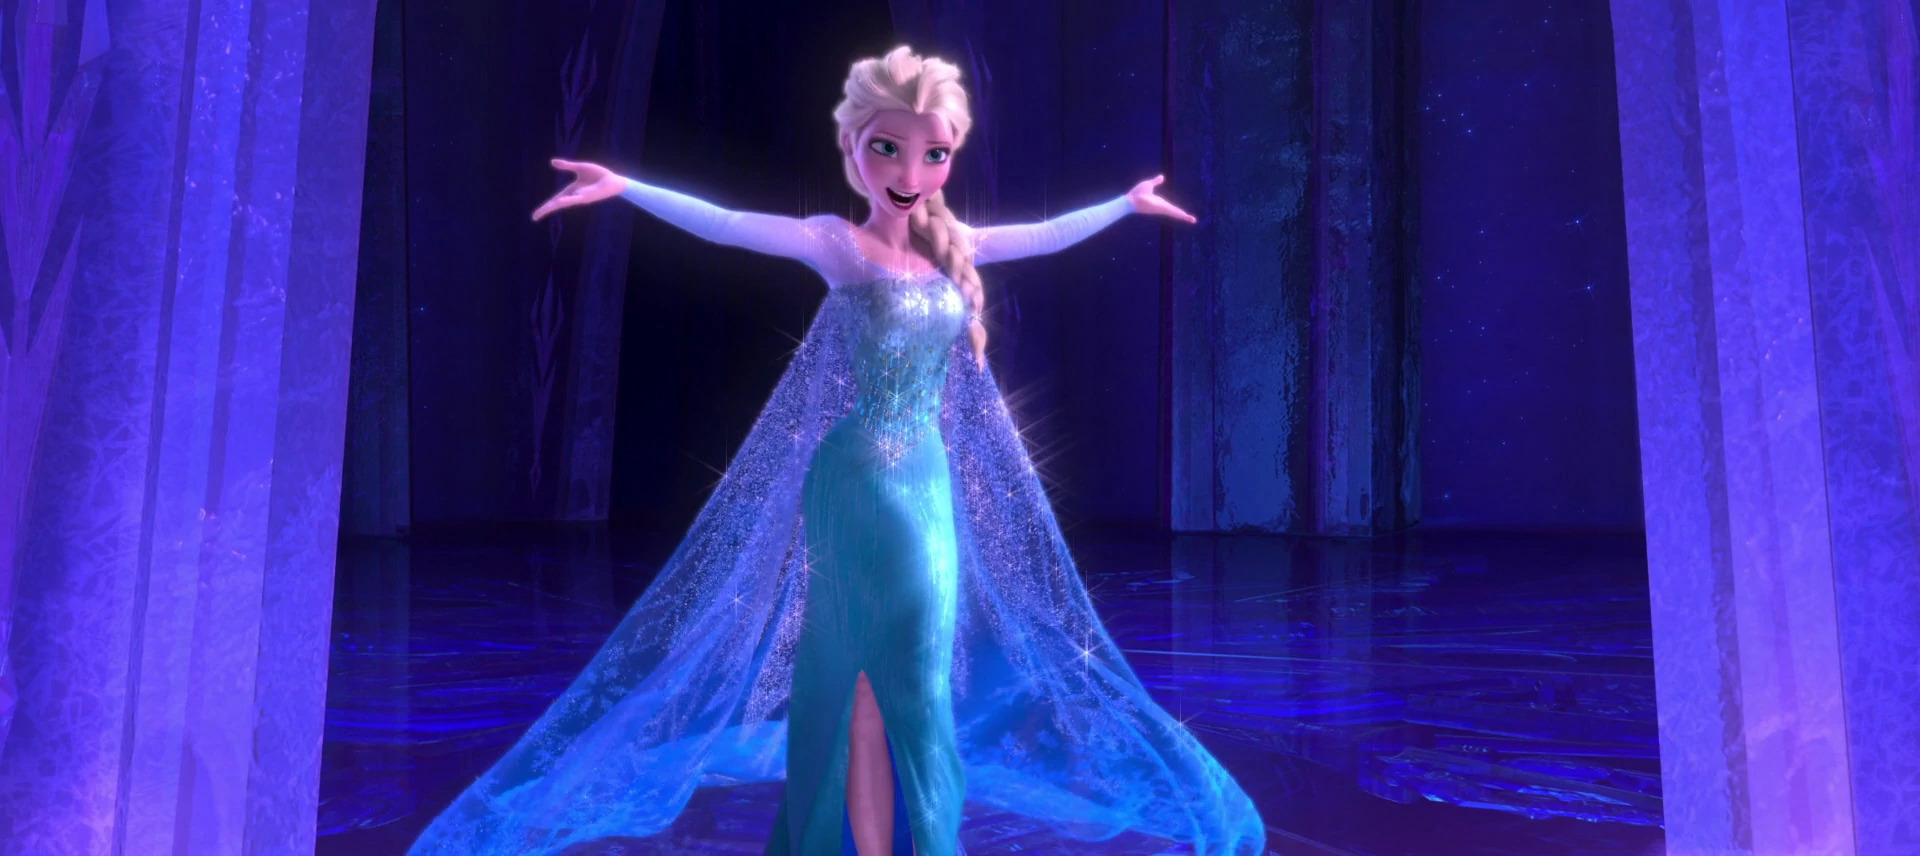 elsa sashaying in her icy blue dress, holding her arms out in frozen